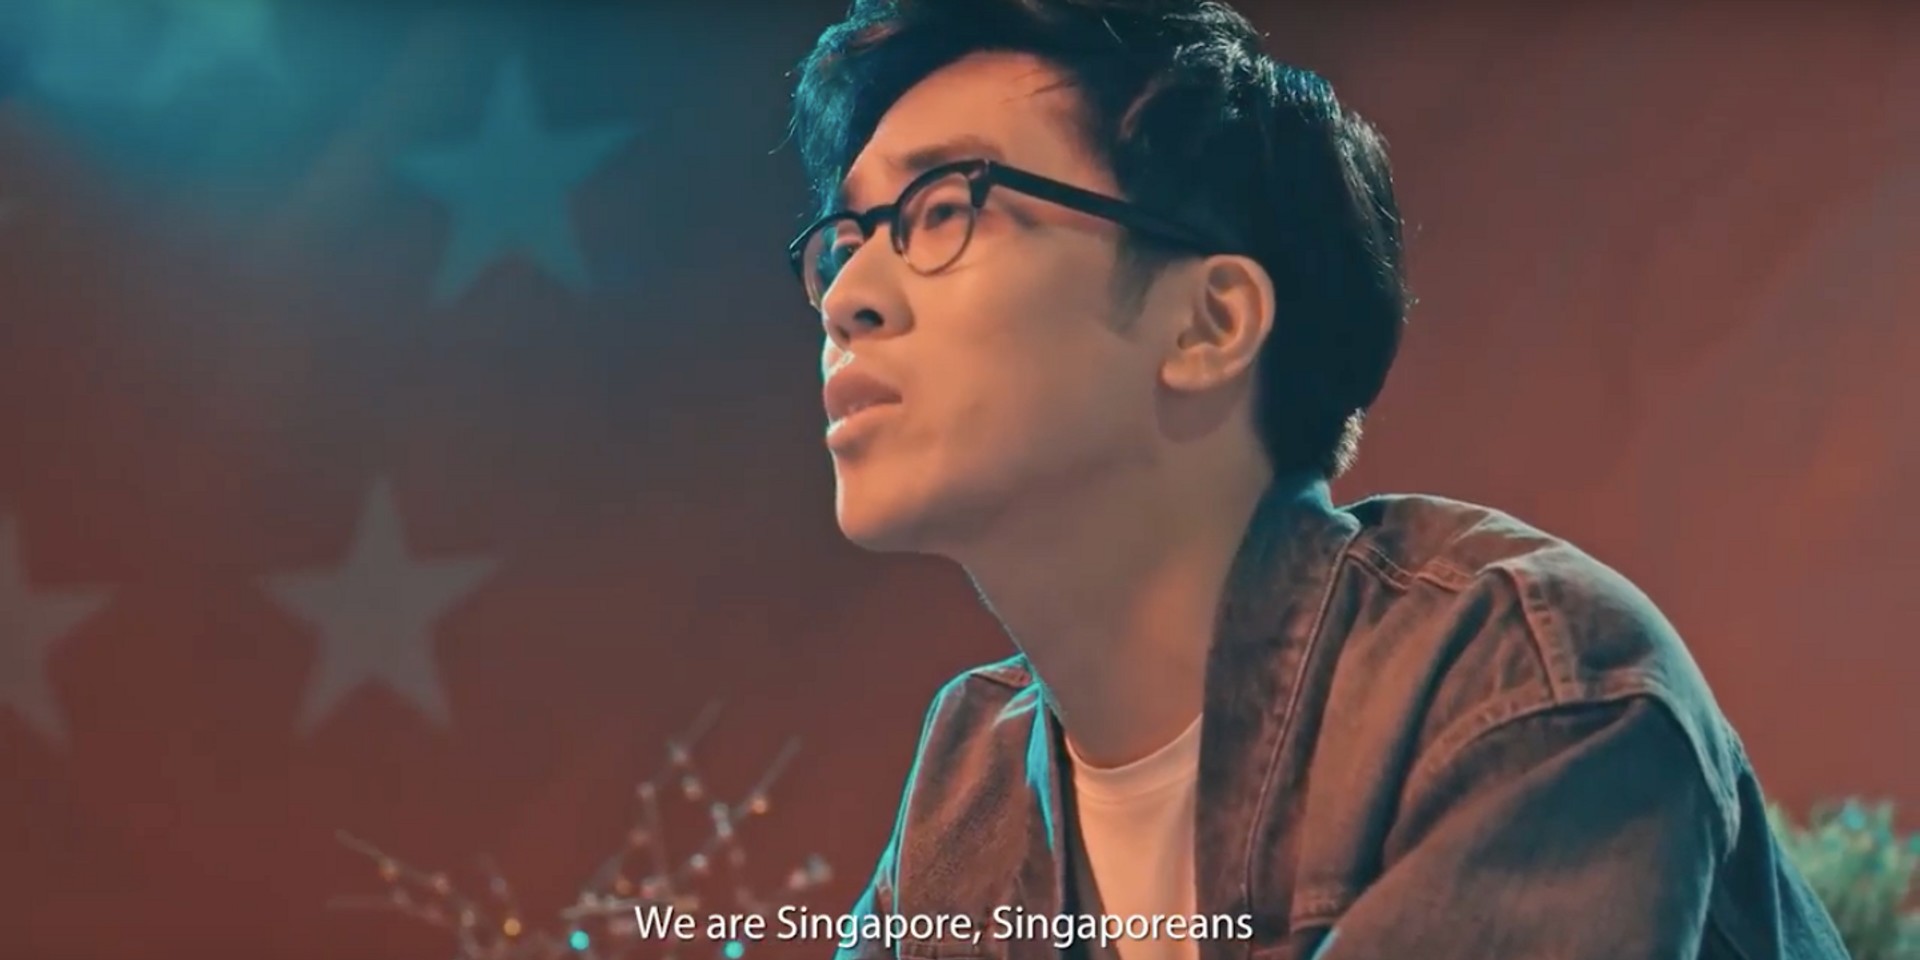 For this year's National Day song, Charlie Lim breathes new life into a classic – watch